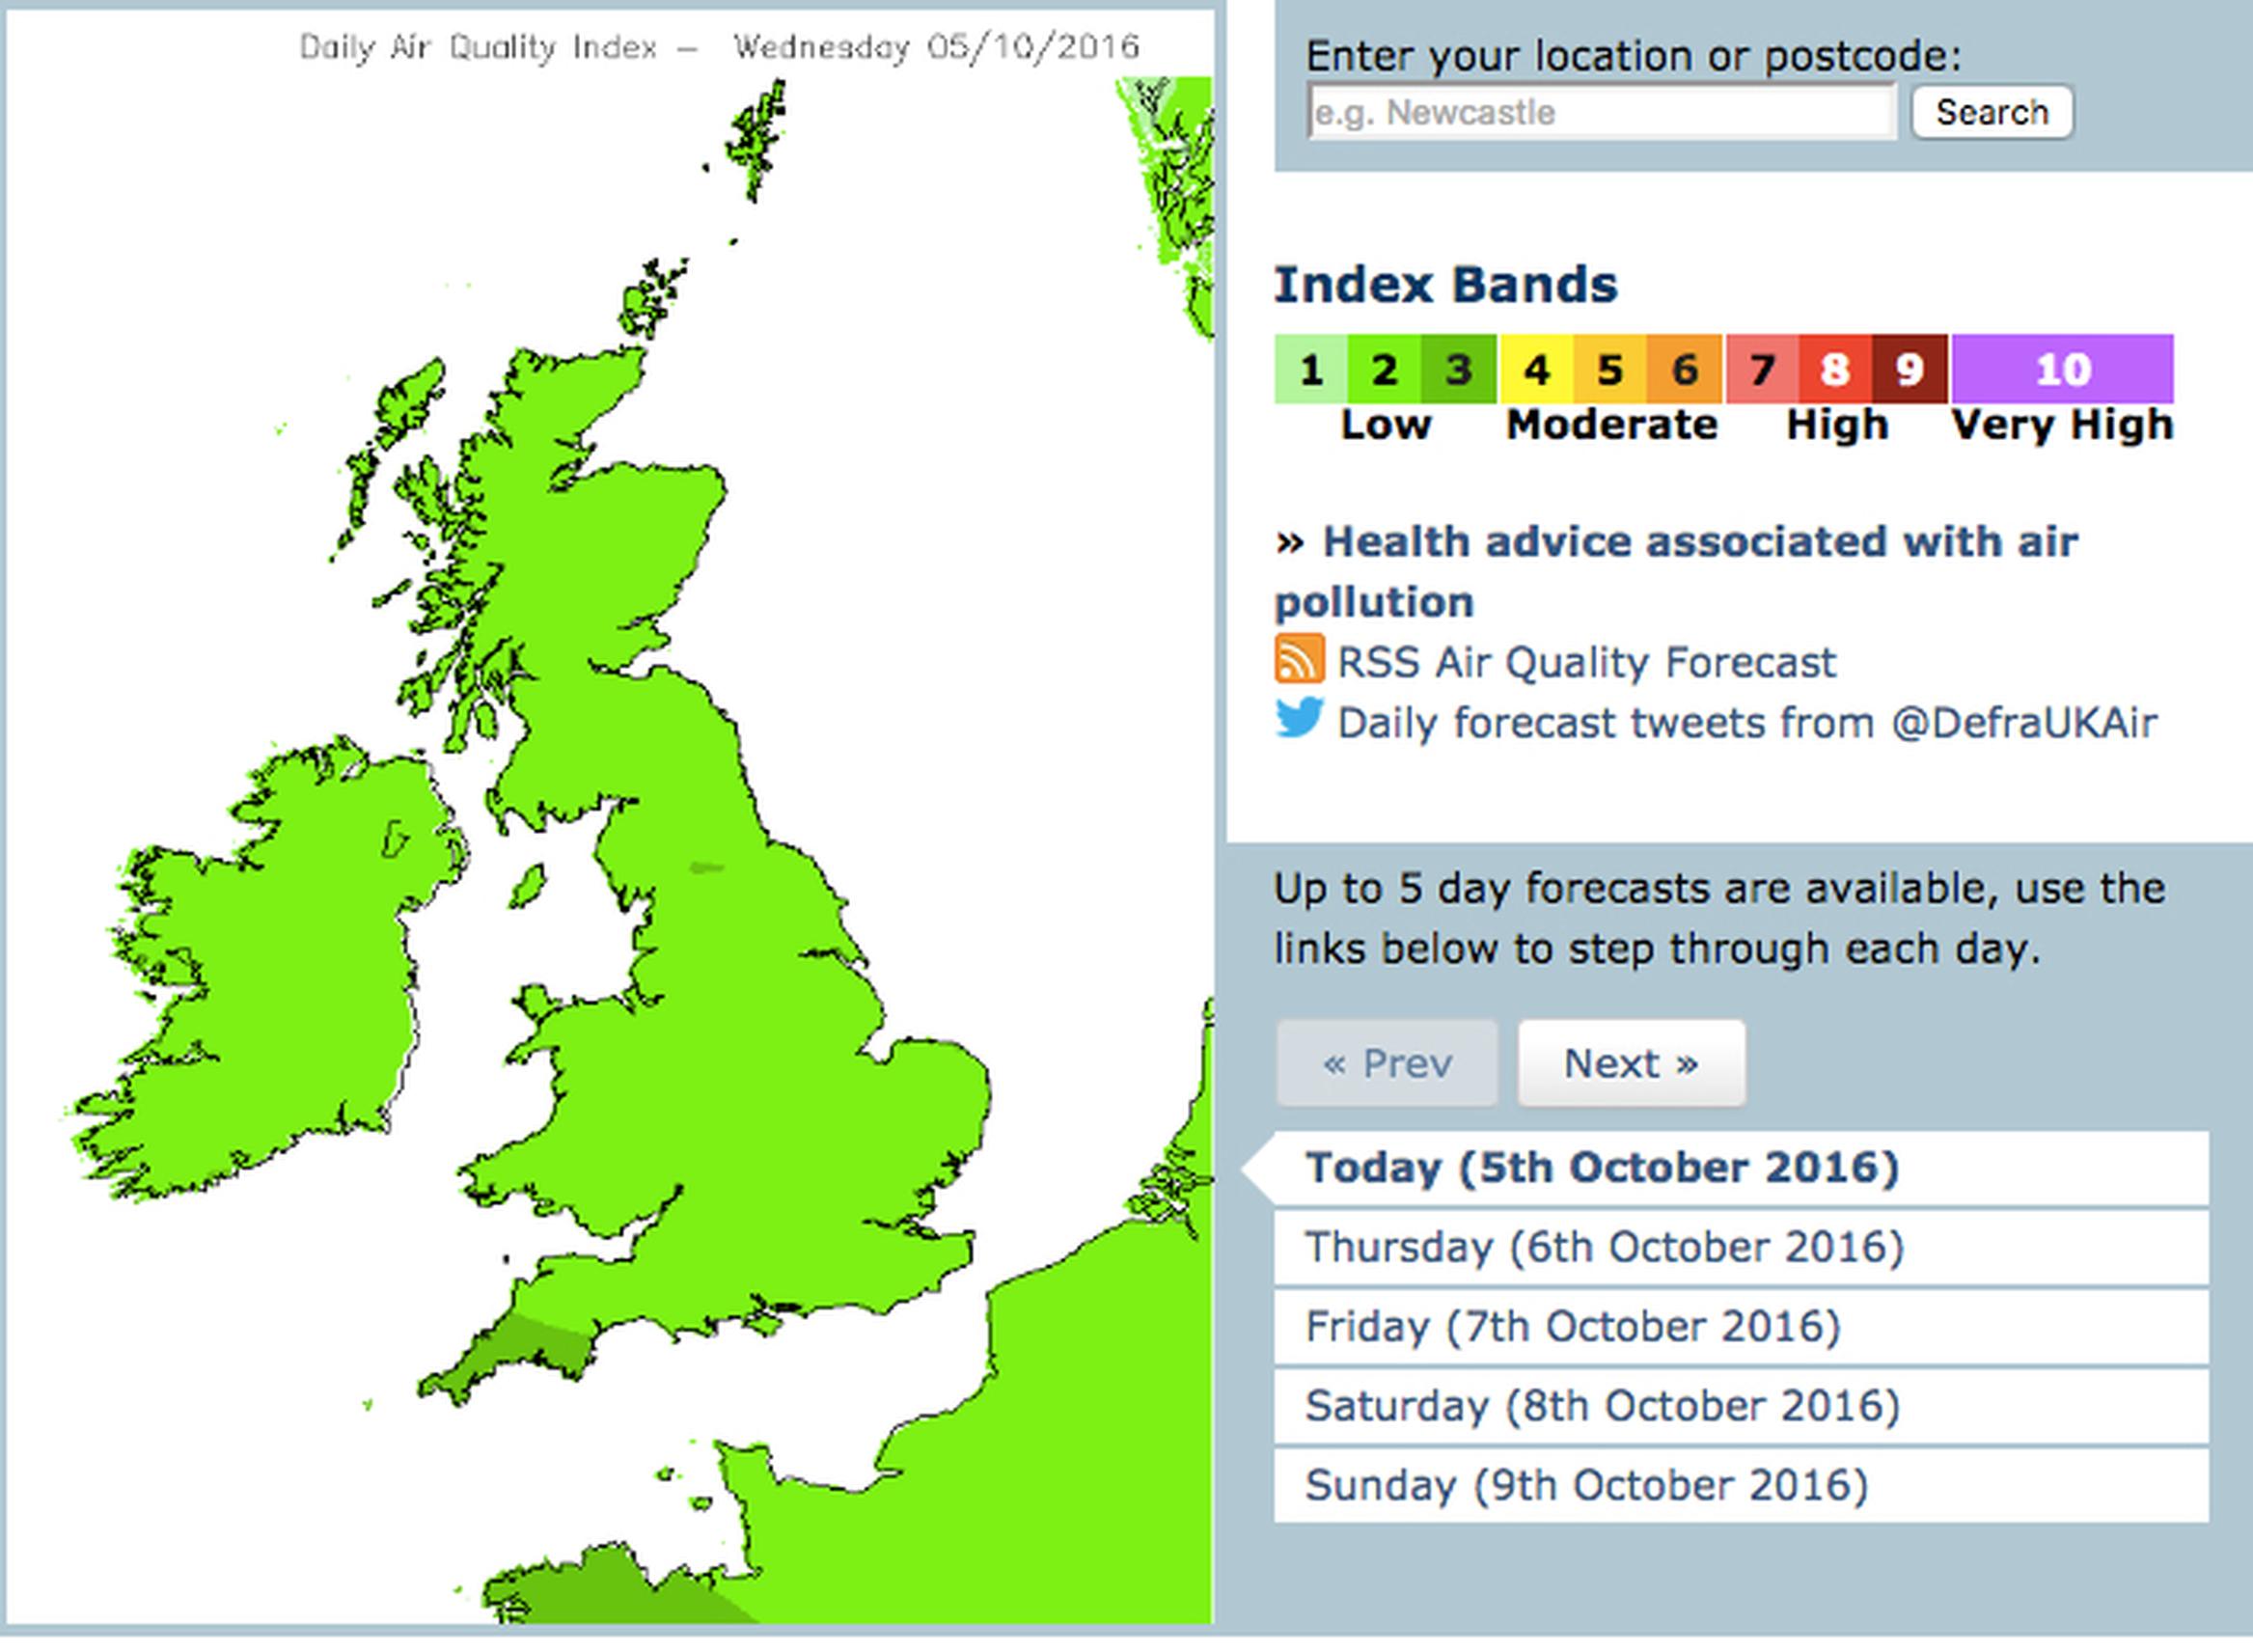 DEFRA air quality forecasts for this week; but WHO says pollution levels across UK exceed WHO limits. Are WHO limits so low?